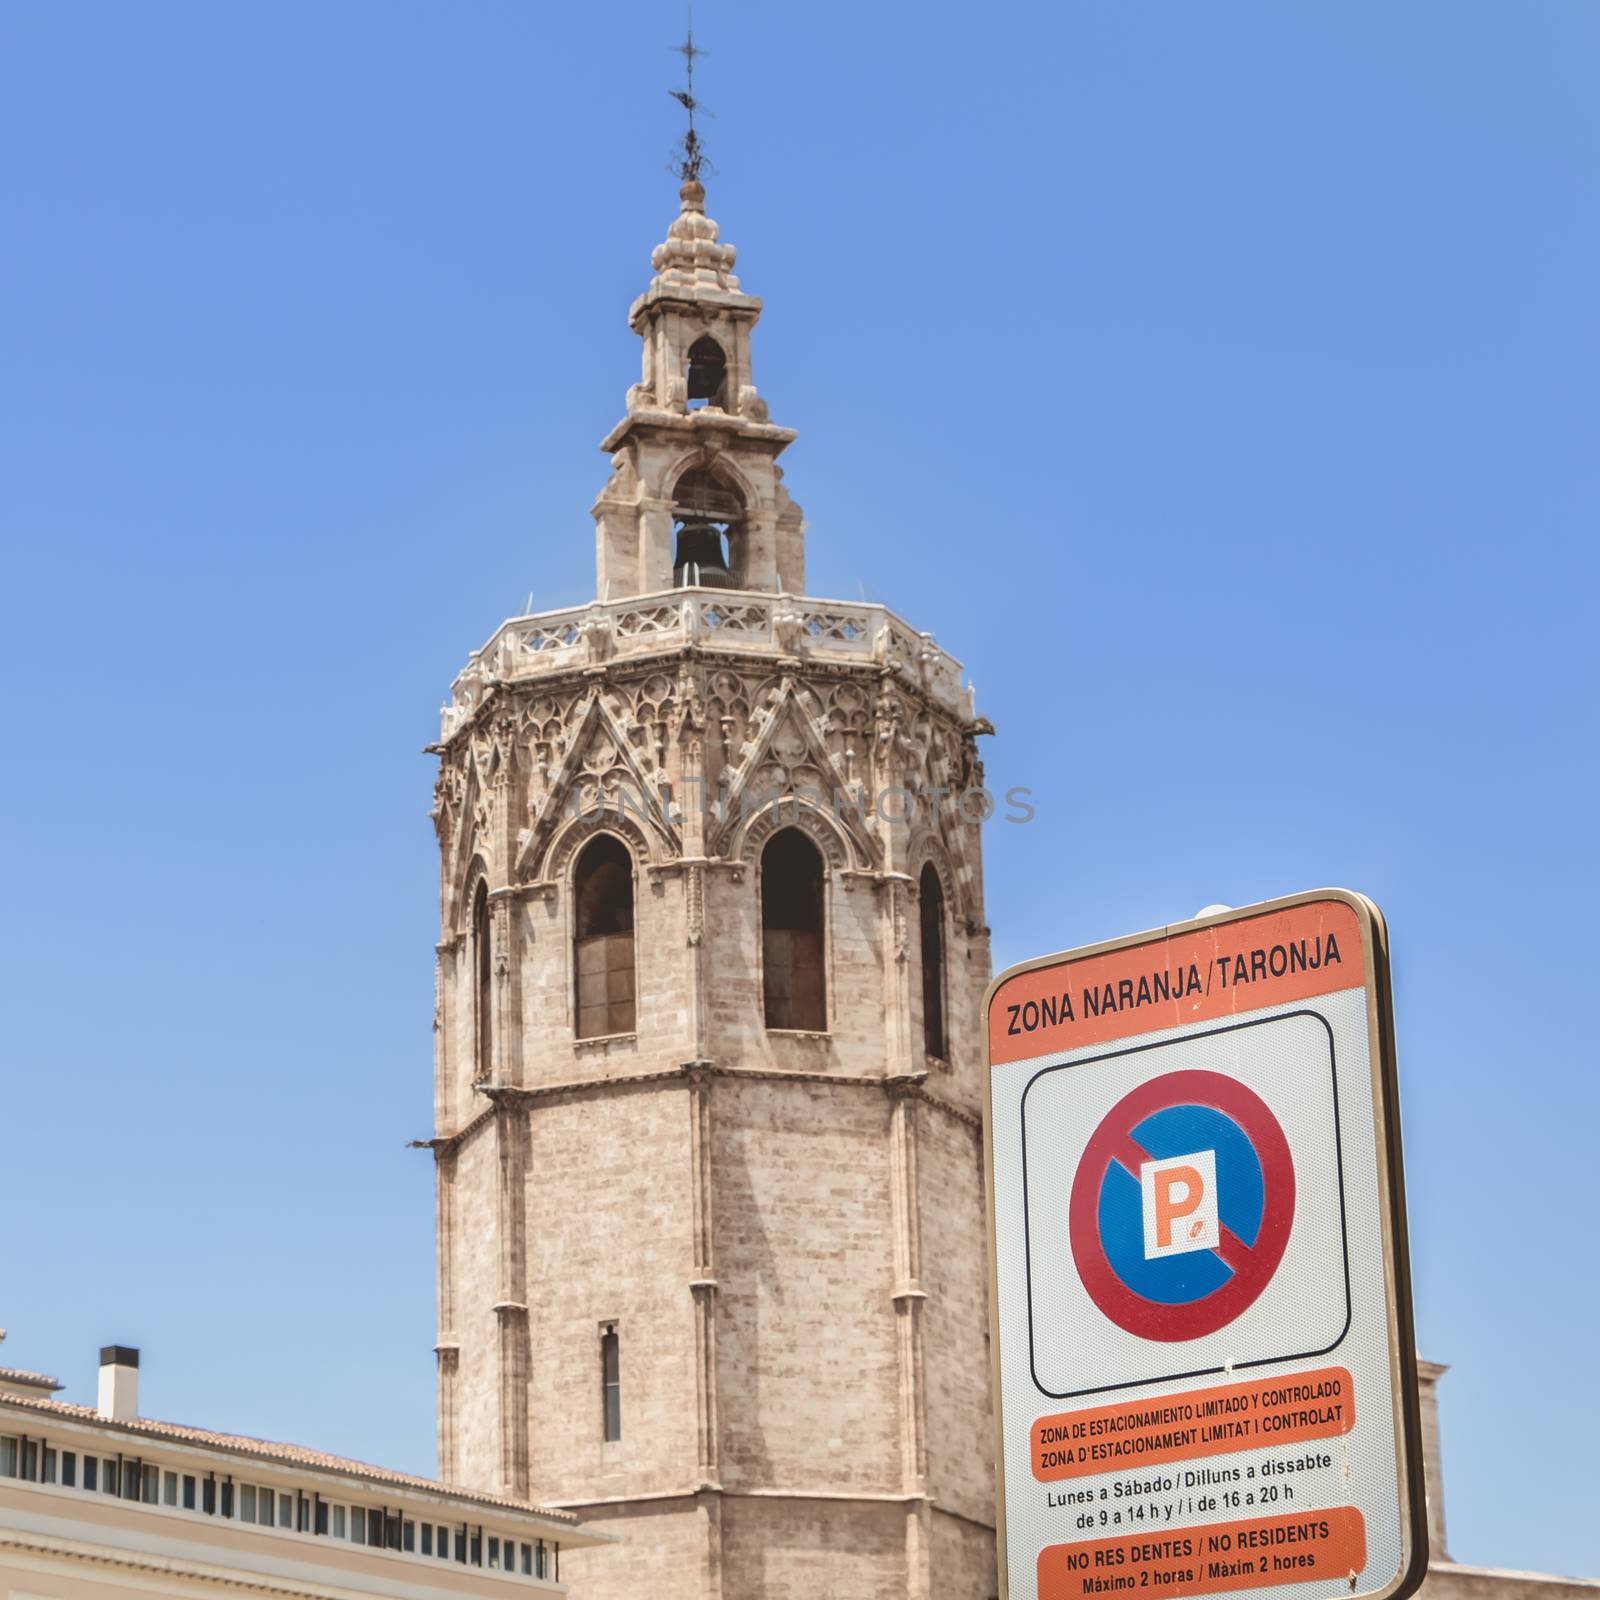 Valencia, Spain - June 16, 2017: road sign indicating an Orange parking area (Zona Naranja) and a limited and controlled parking area in the dentre city on a summer day